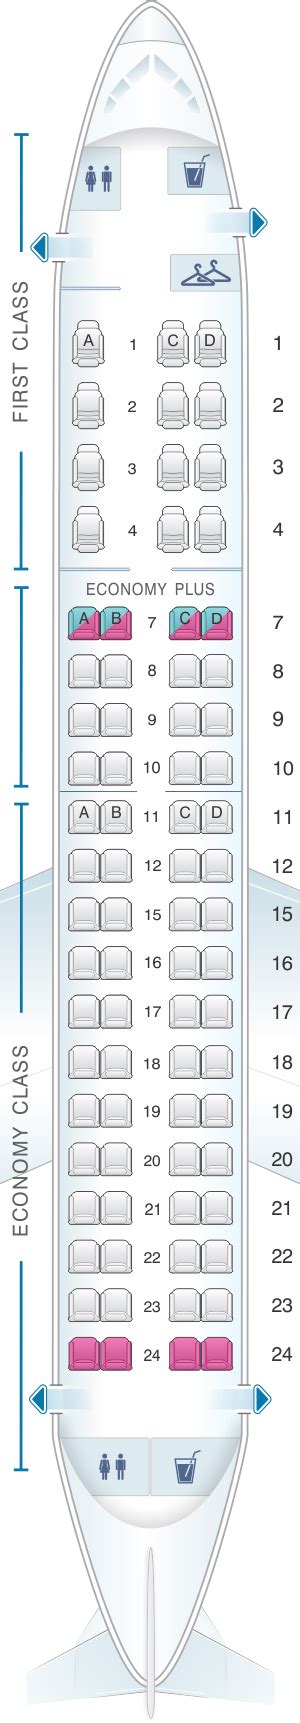 Version 1 of the United Expres Embraer 175 features a total of 70 seats arranged in three different configurations. 12 Seats (1A-4D) can be found in the First Class, 32 Seats (7A …